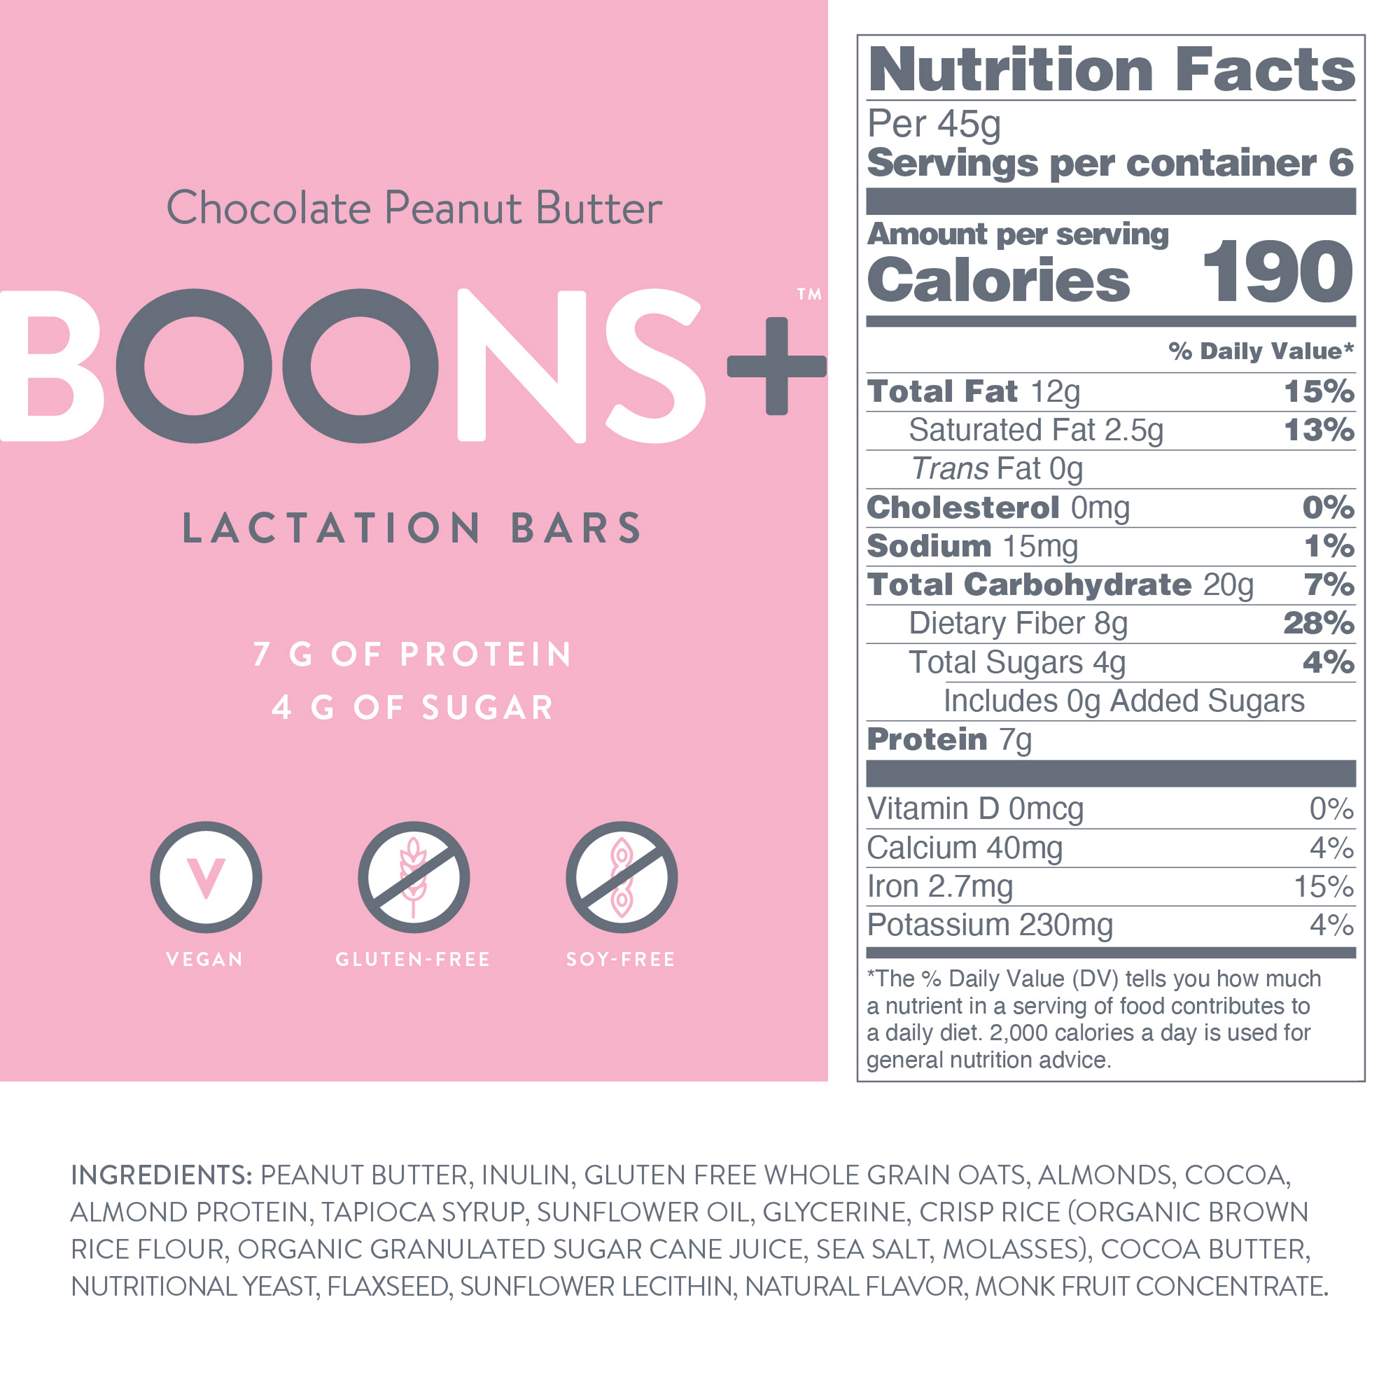 Boons + Lactation Bars Chocolate Peanut Butter; image 2 of 3